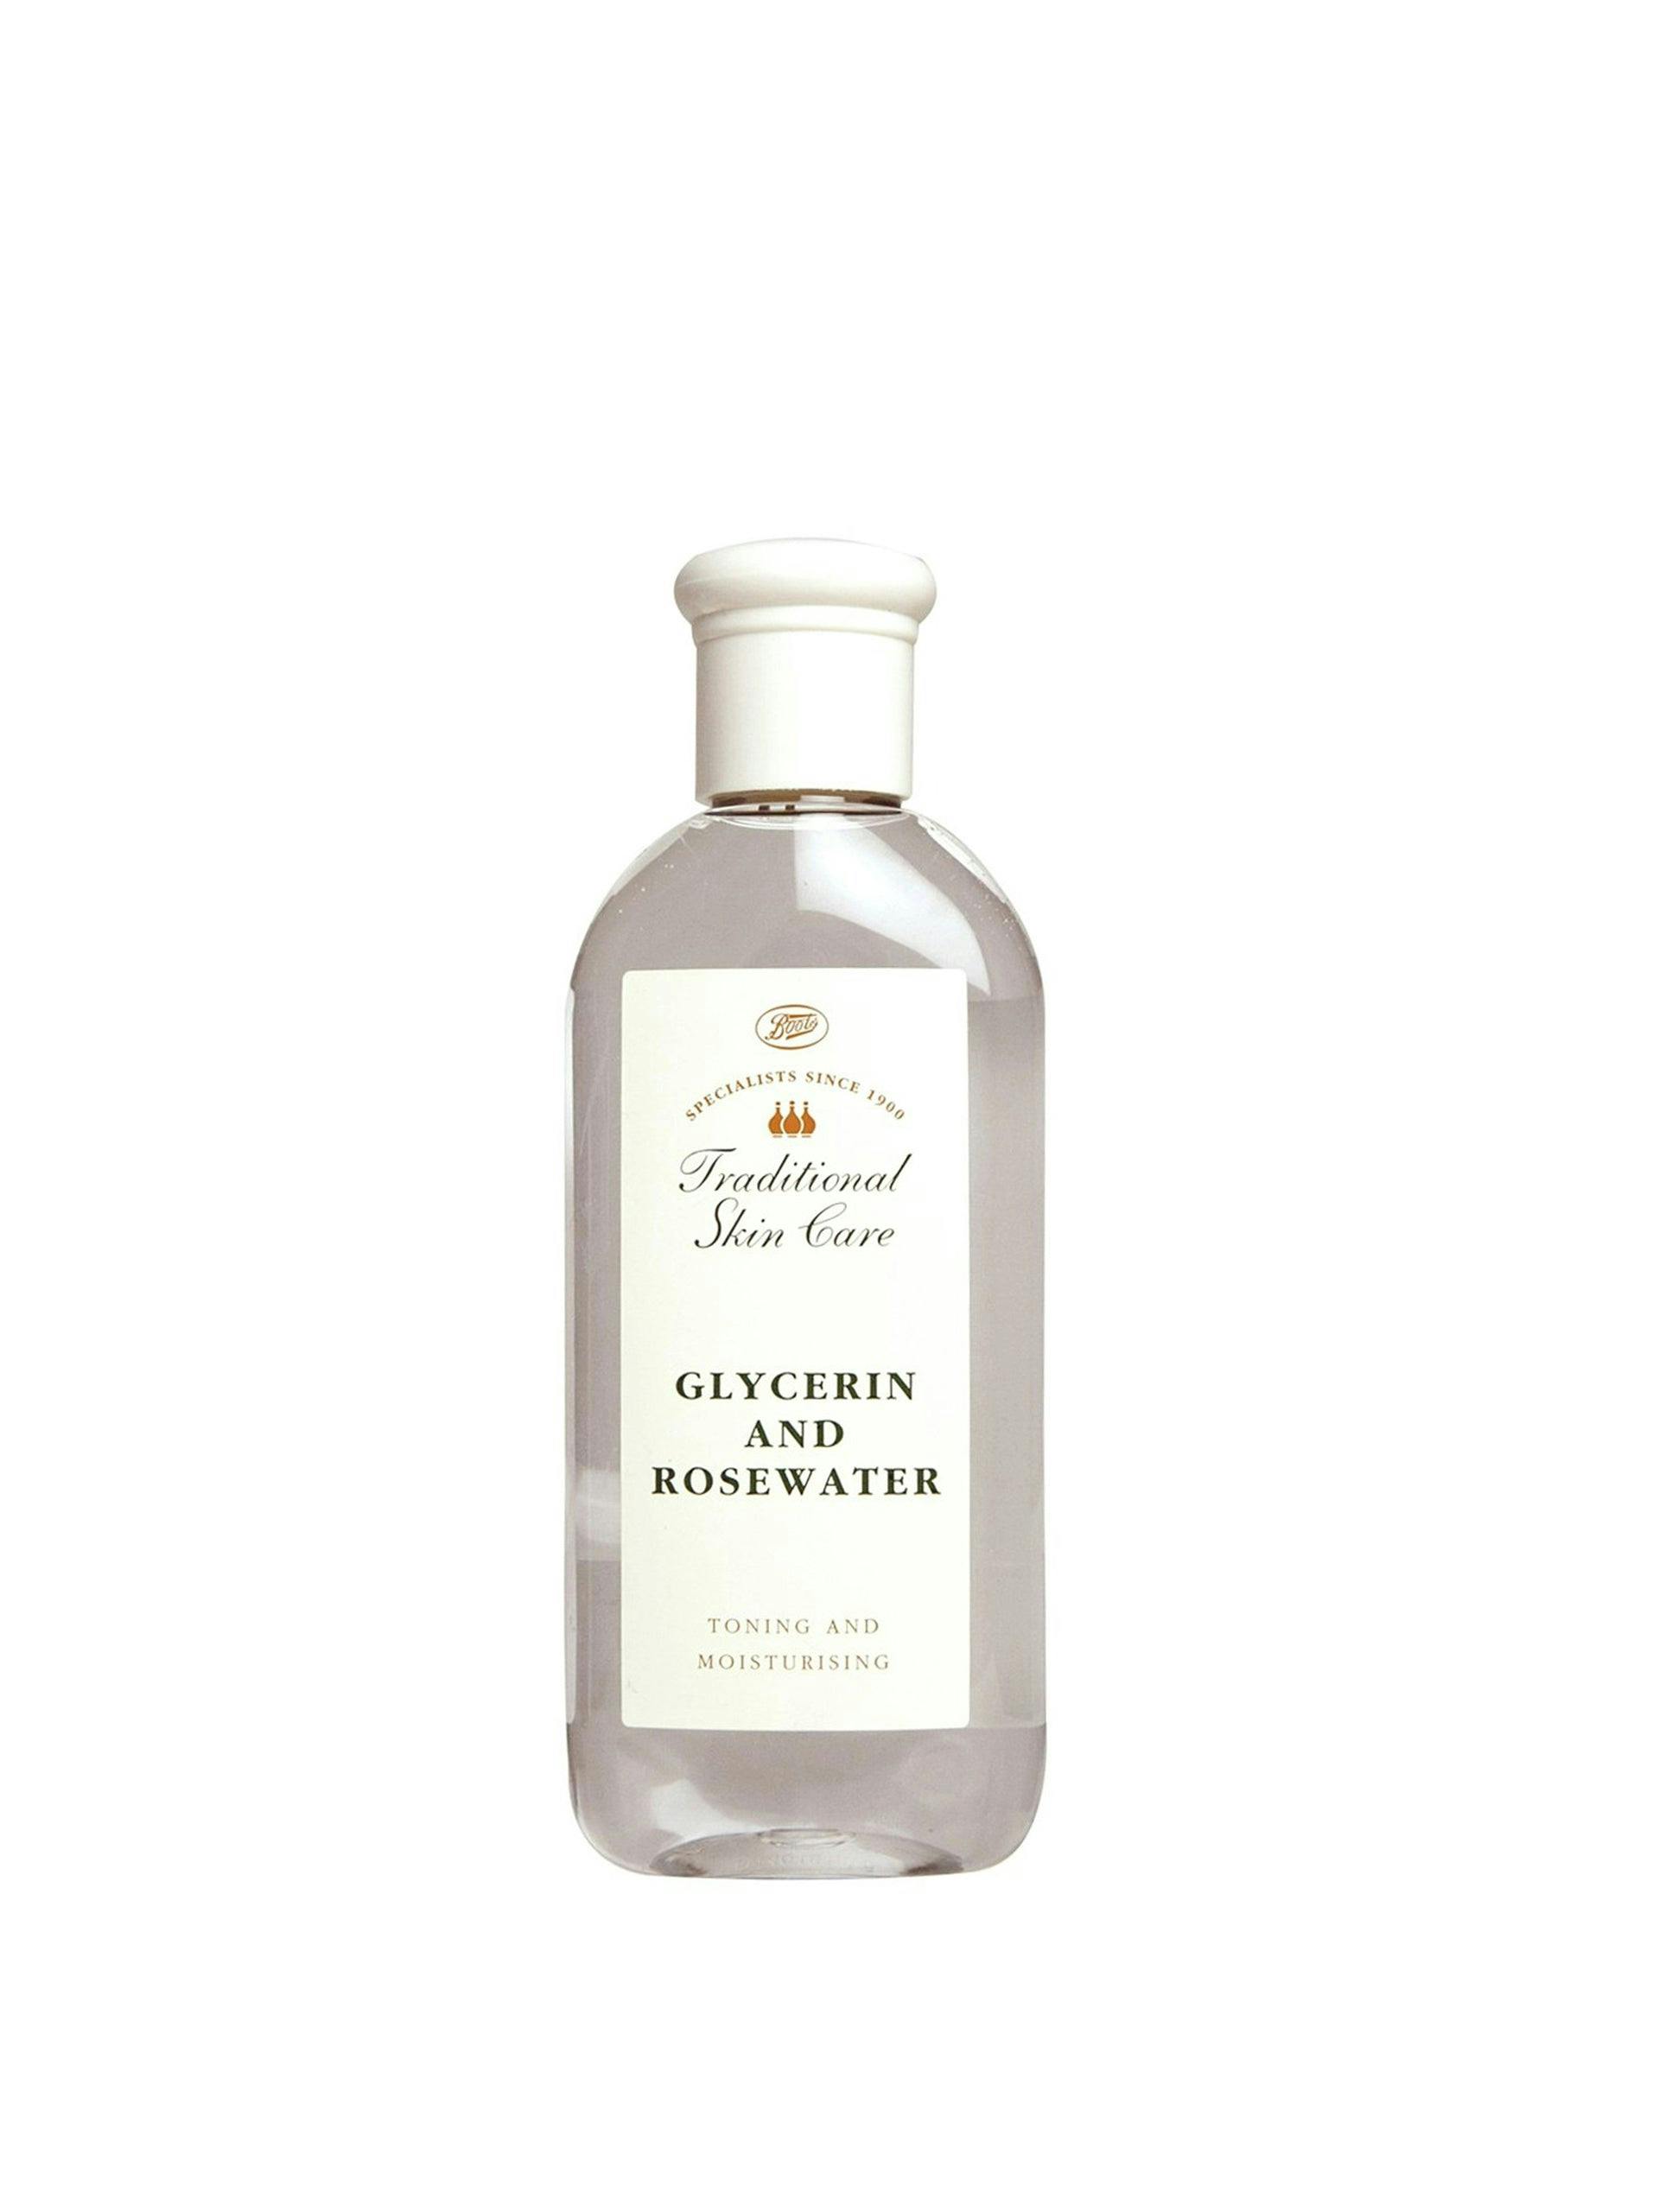 Glycerin and rosewater toner